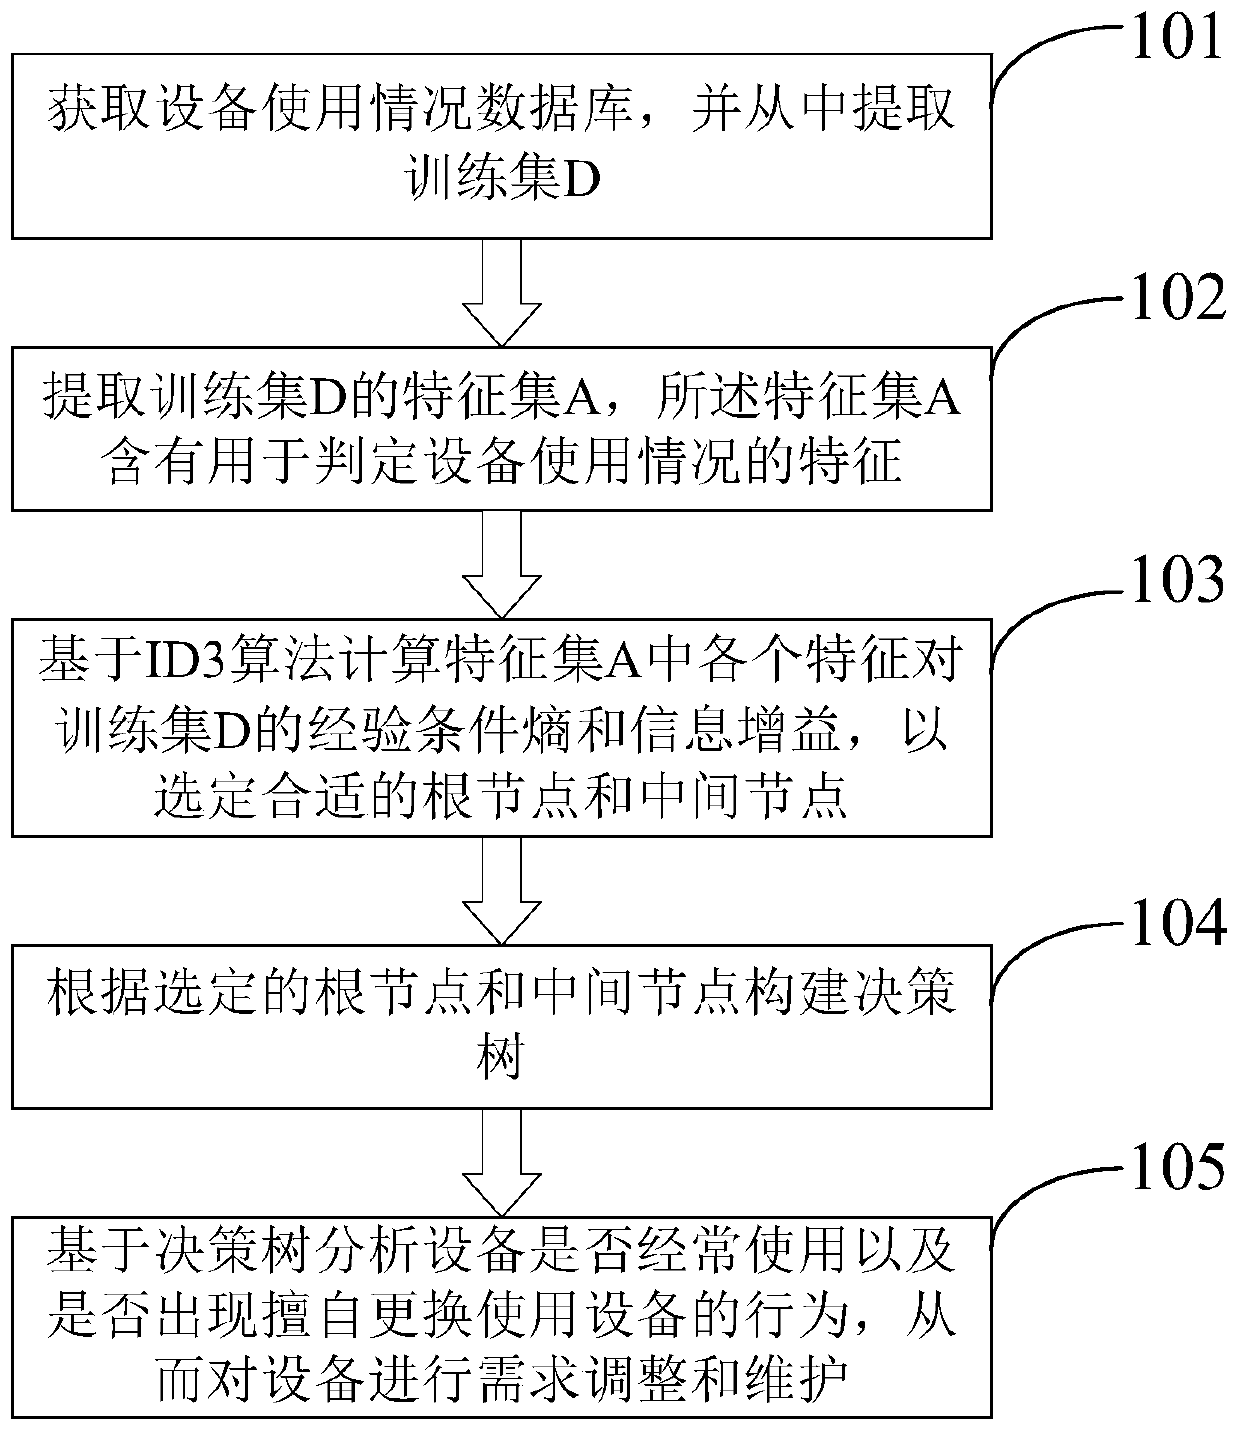 Man-machine relationship verification method and device based on equipment use conditions